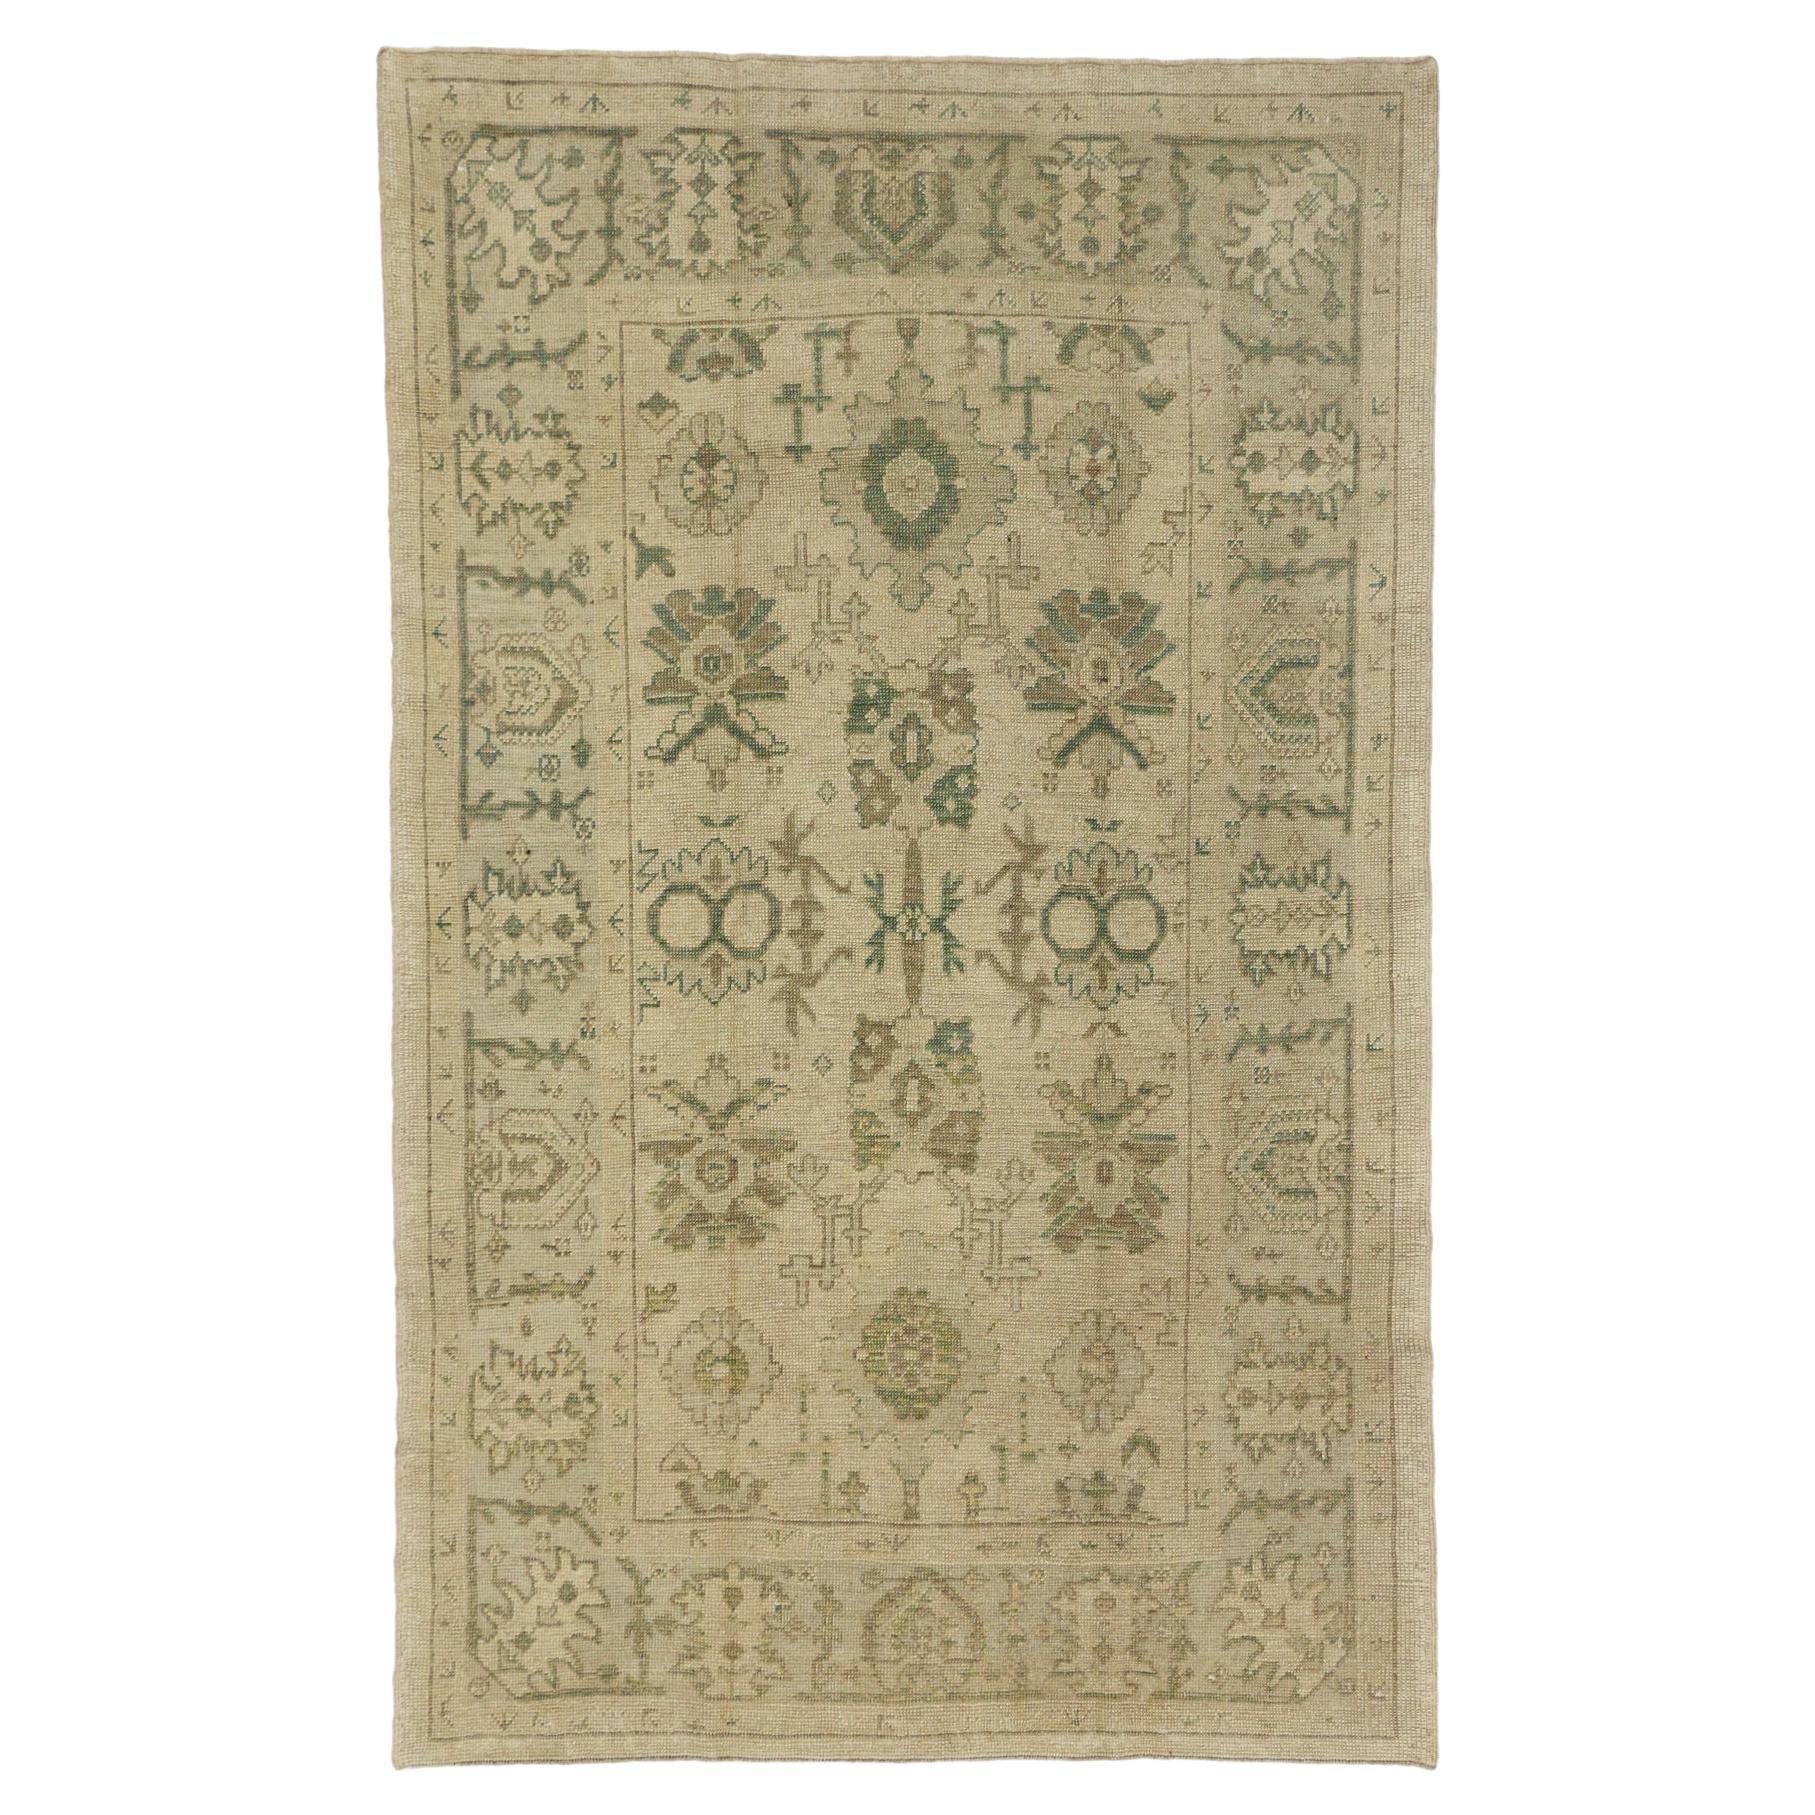 New Vintage-Inspired Turkish Oushak Rug with Earth-Tone Colors